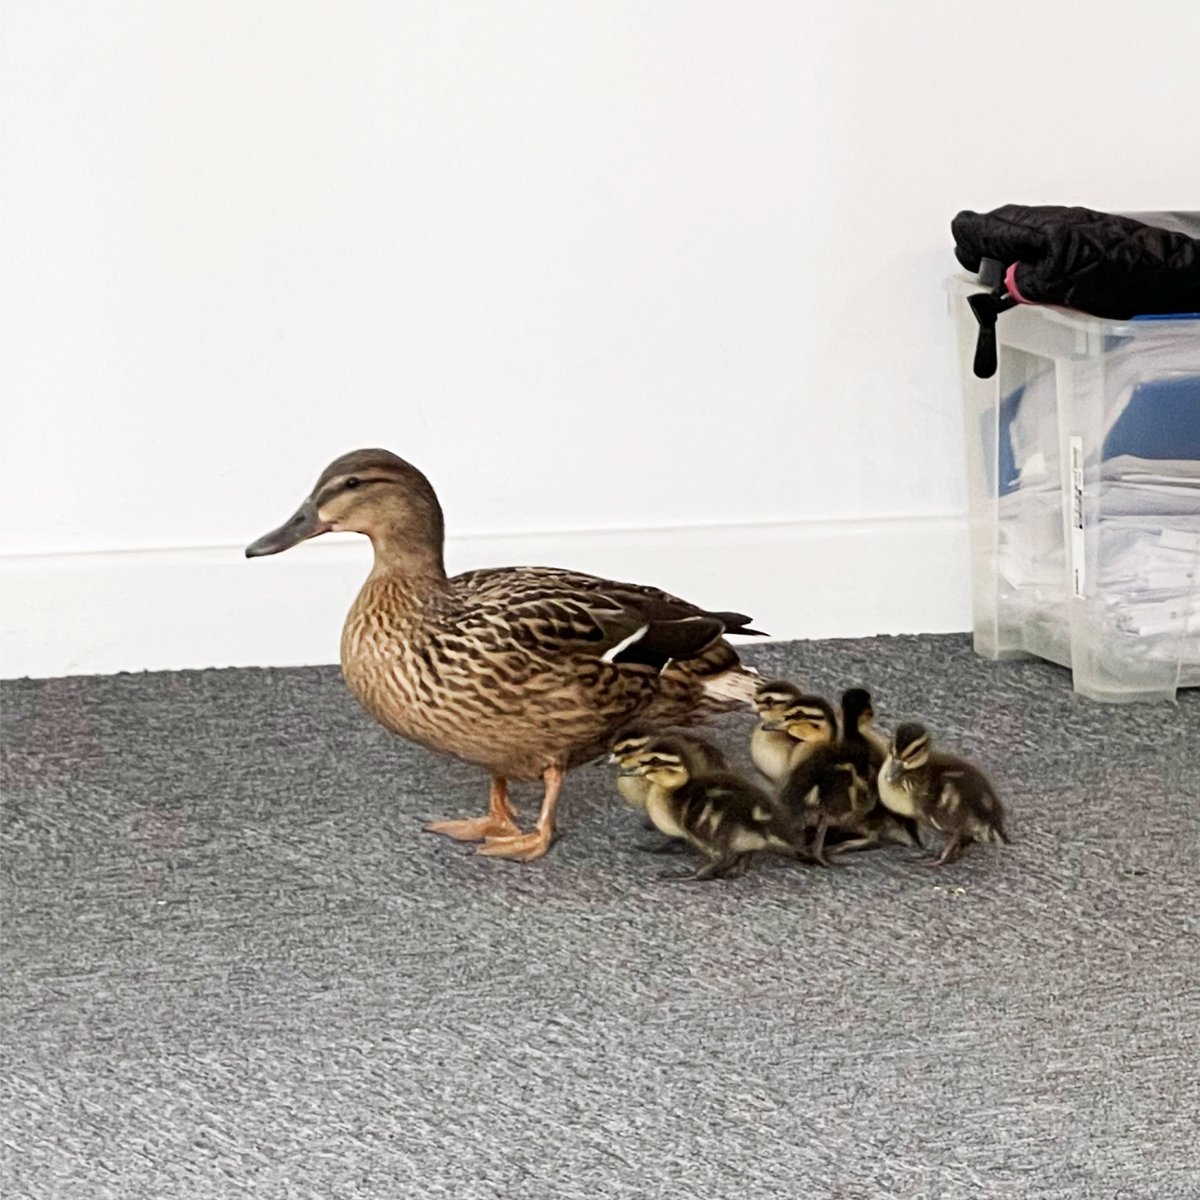 A lovely resident in our complex noticed these little guys roaming the car park and they popped in to say hello. With a team effort from everyone they were released into a safe area with some duck friends #sheffieldissuper #kelhamisland #designagency #ducks #ducklings #teameffort